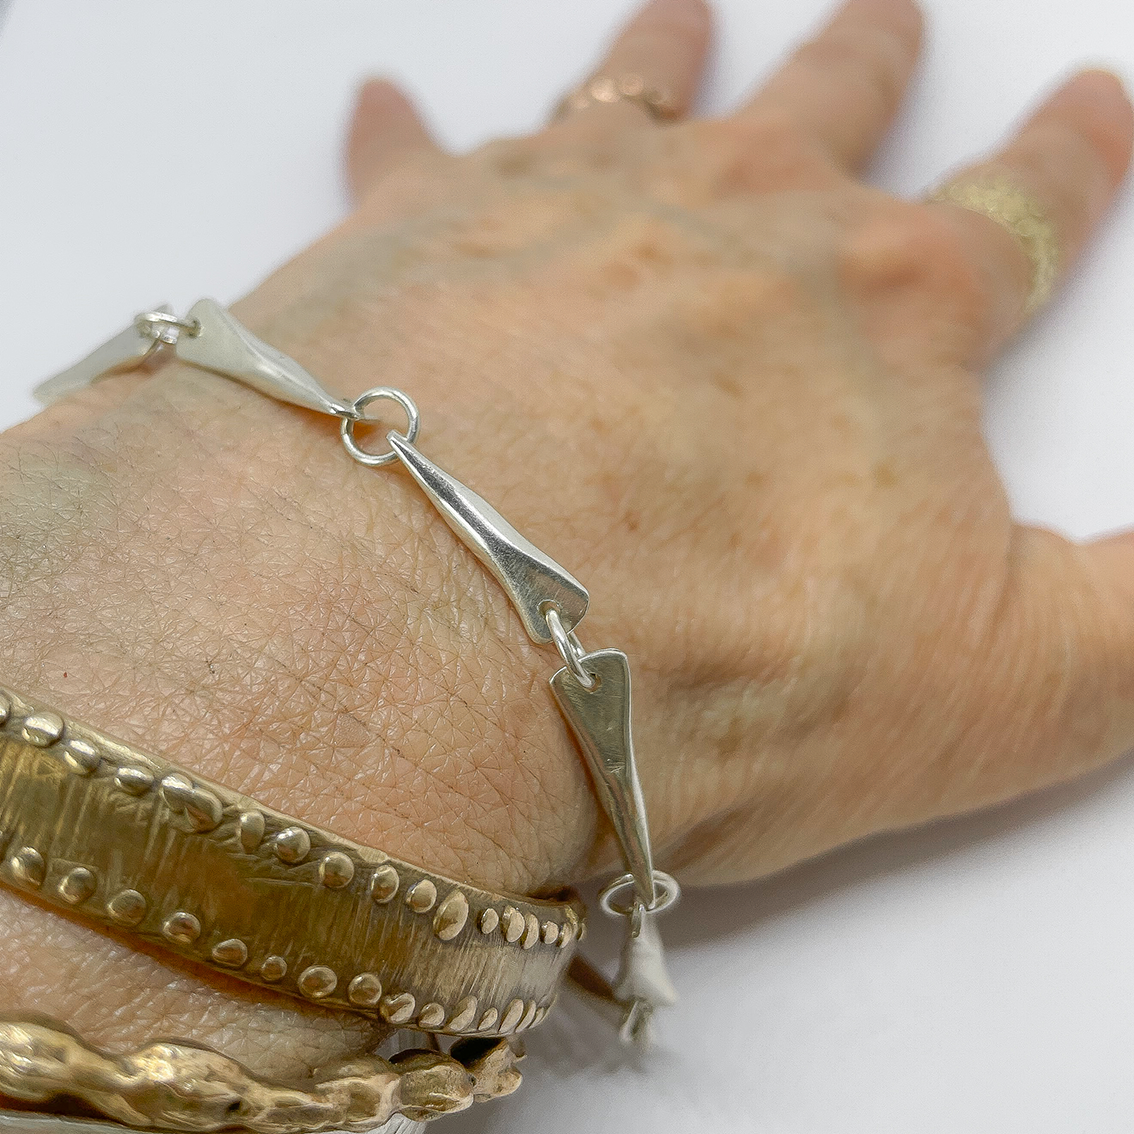 Hand wearing the Butterfly link chain and some bangles